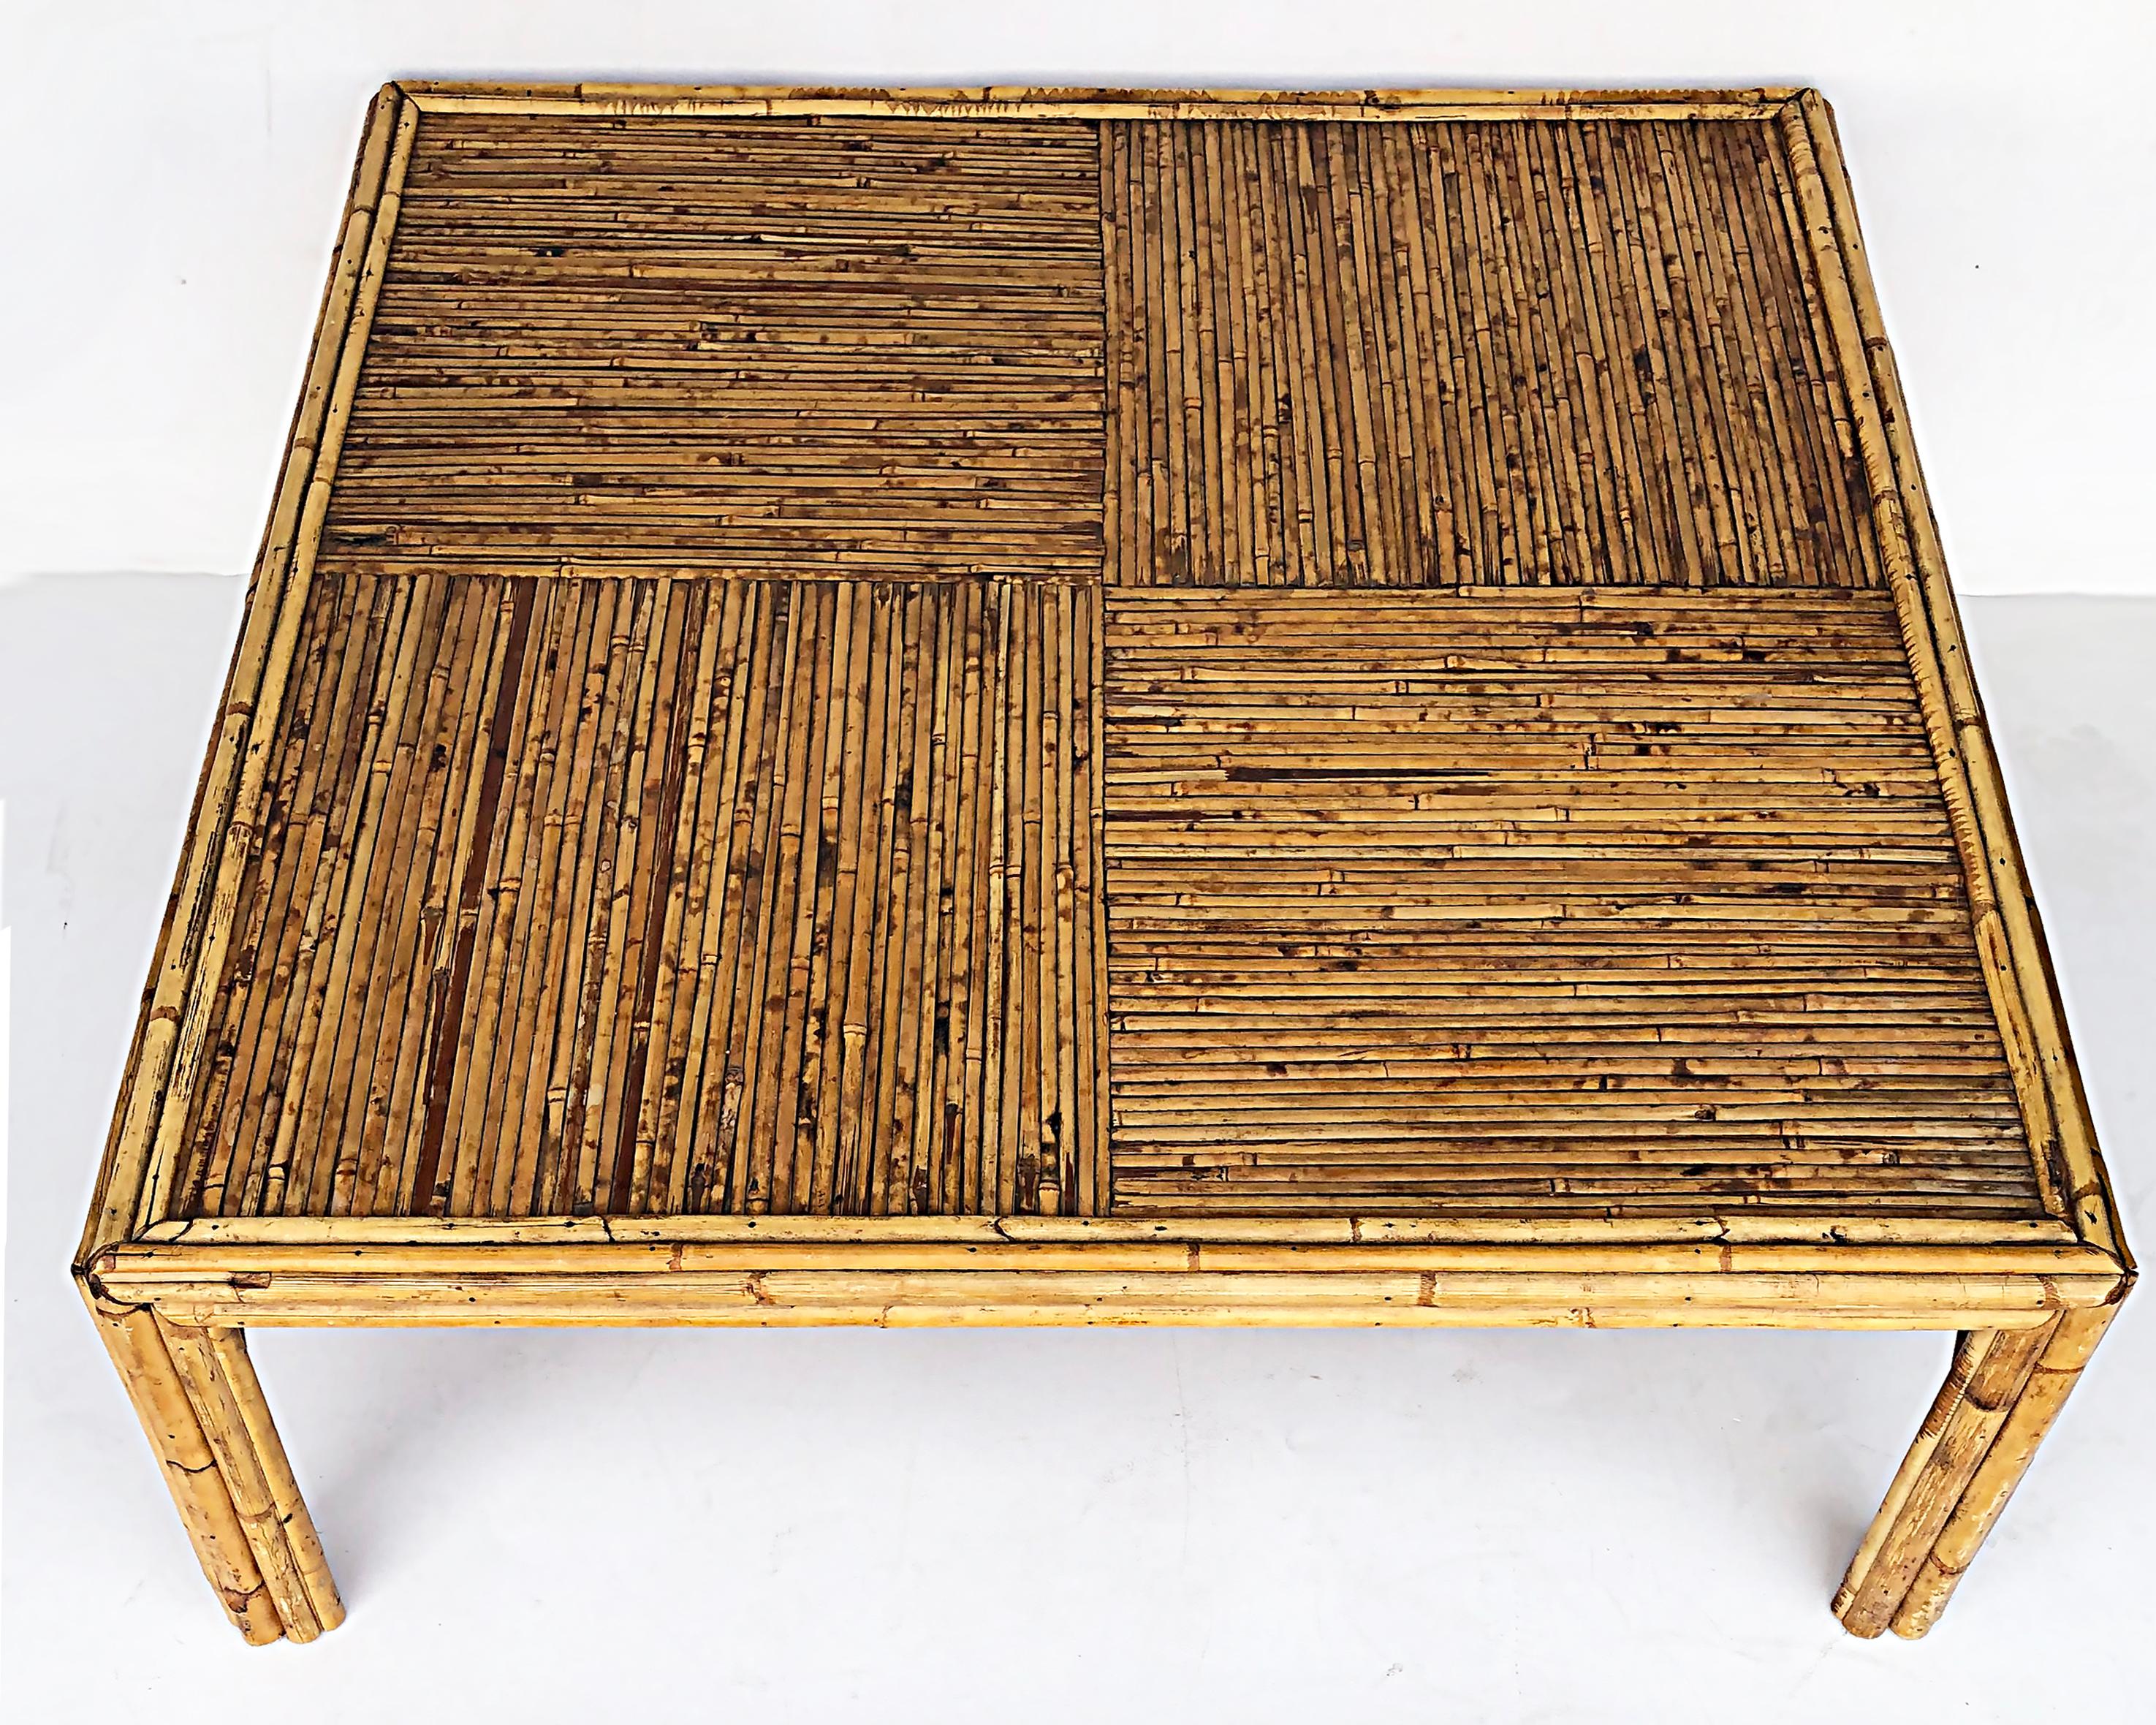 Vintage Bamboo Coffee Table, manner of Gabriella Crespi

Offered for sale is a square vintage coffee table created in bamboo in the manner of Gabriella Crespi. The legs and apron are clad in bamboo as is the table's top. this table can blend